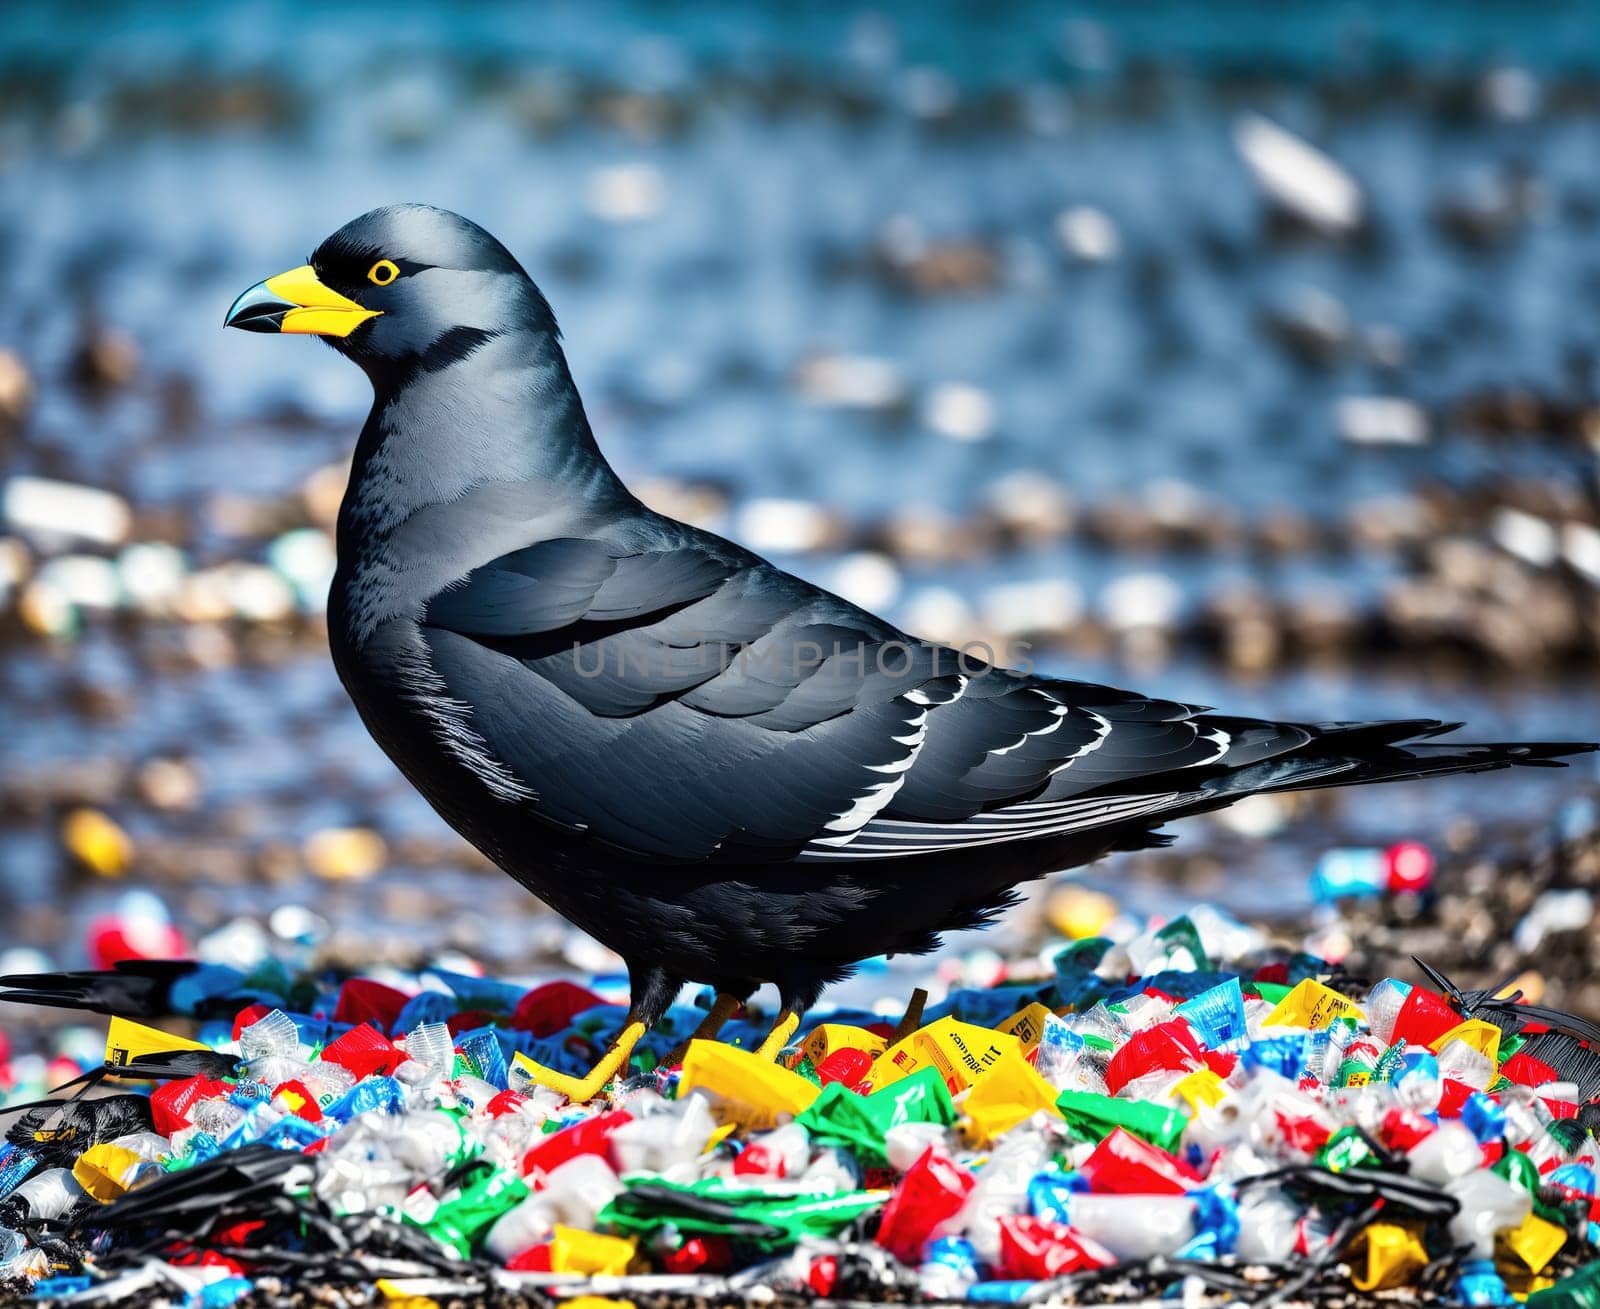 A Seagull Standing on a Pile of Plastic Bottles by creart